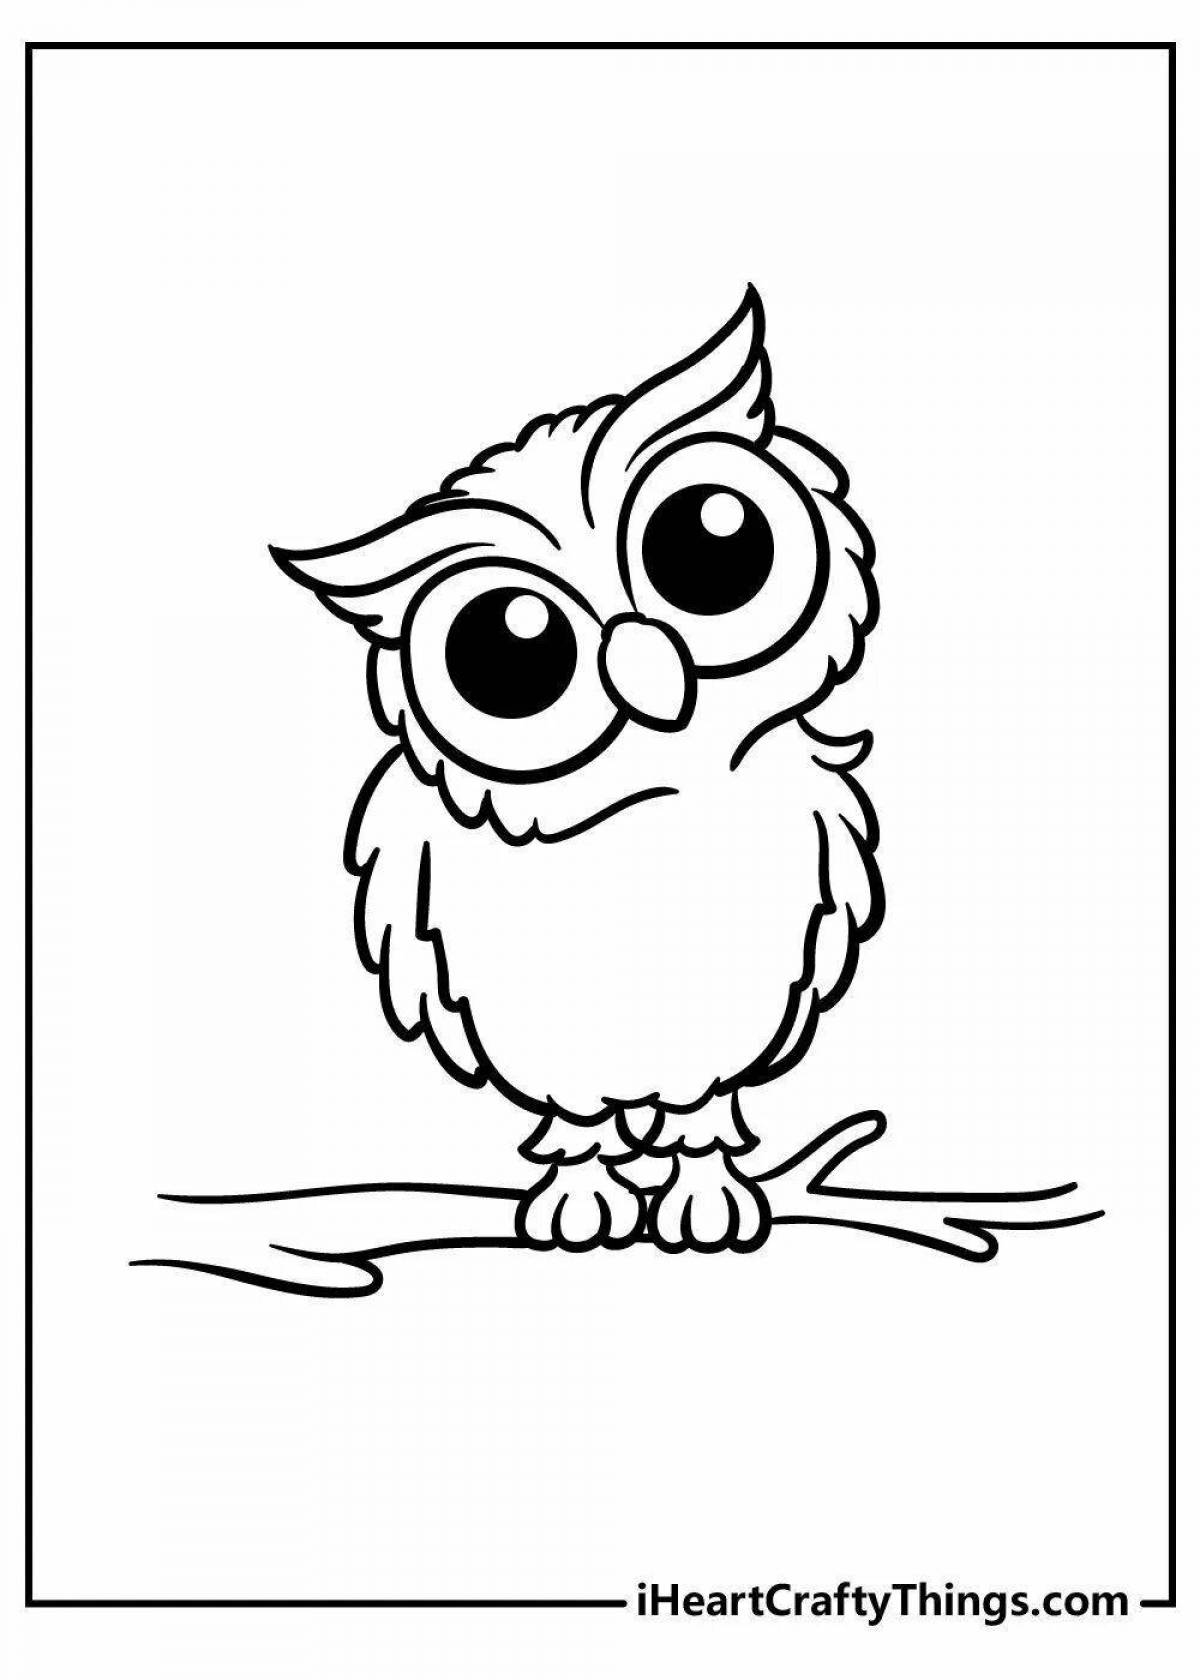 Owl for children 6 7 years old #5